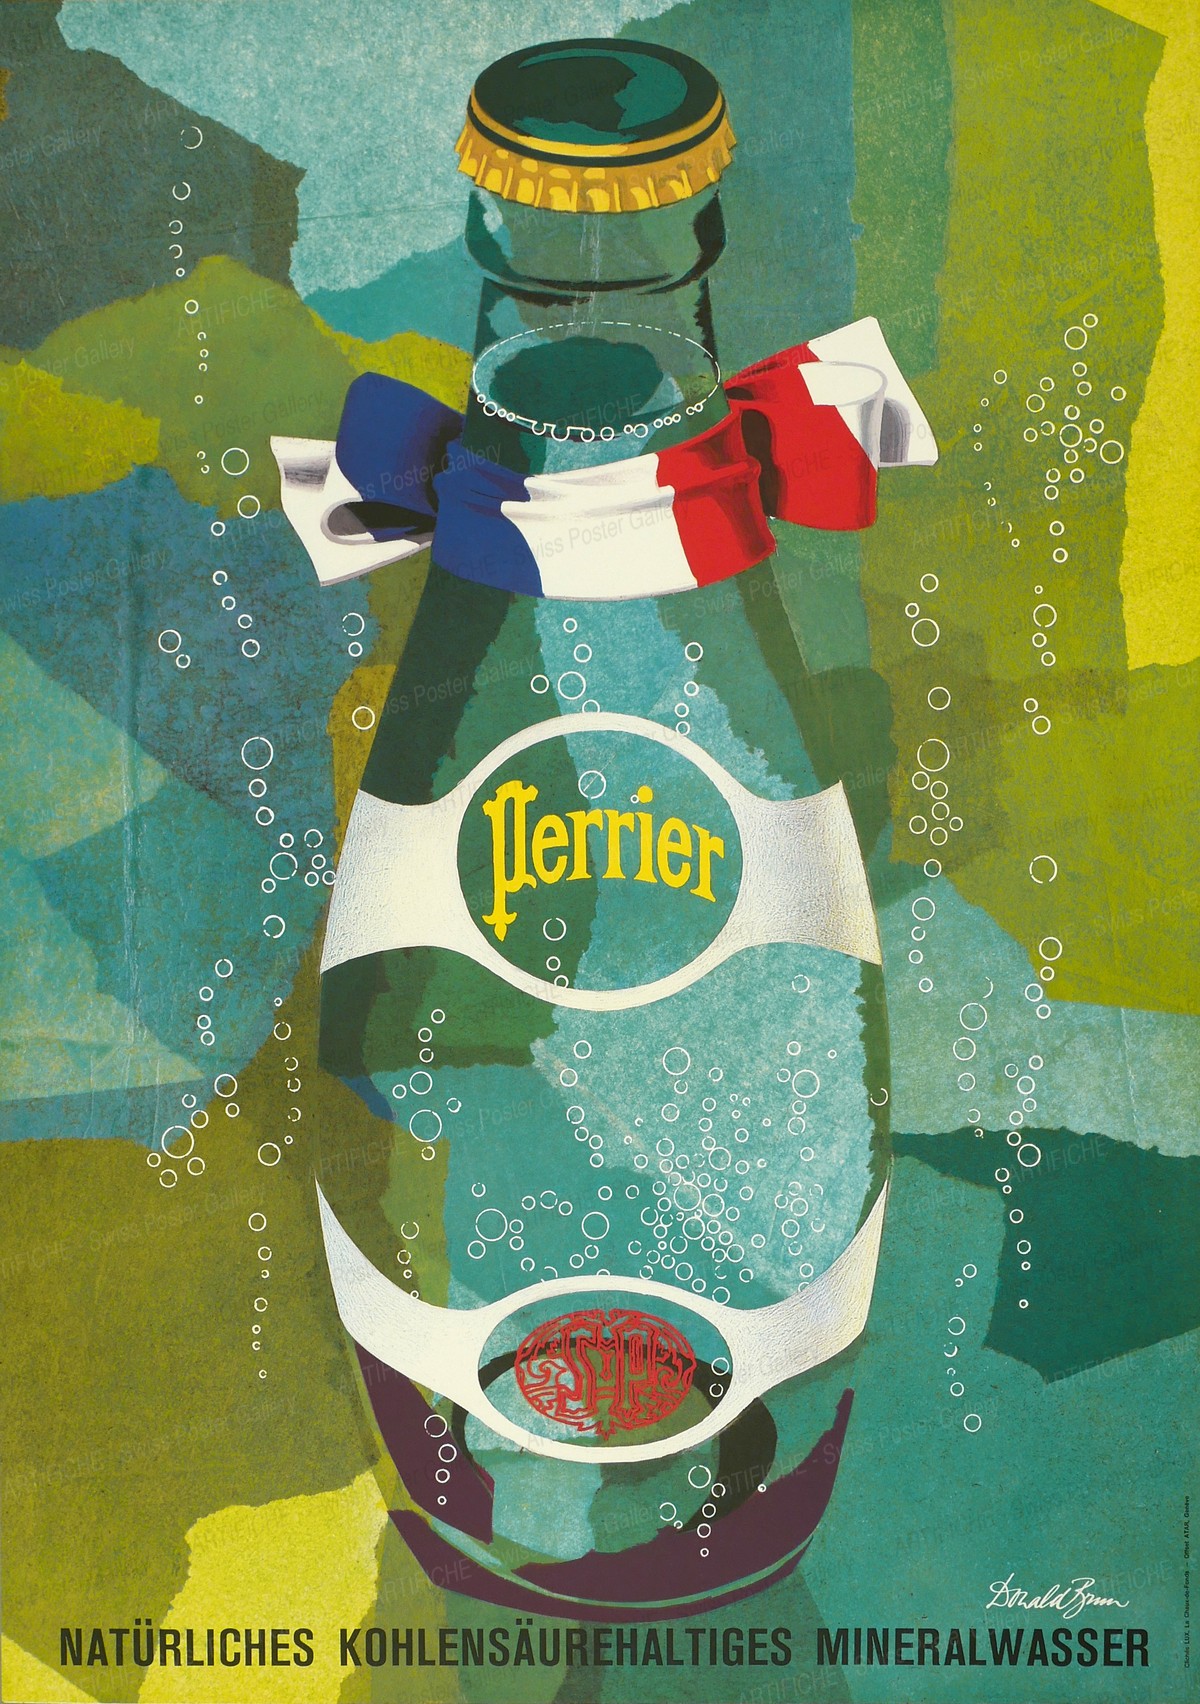 Perrier mineral water, Donald Brun